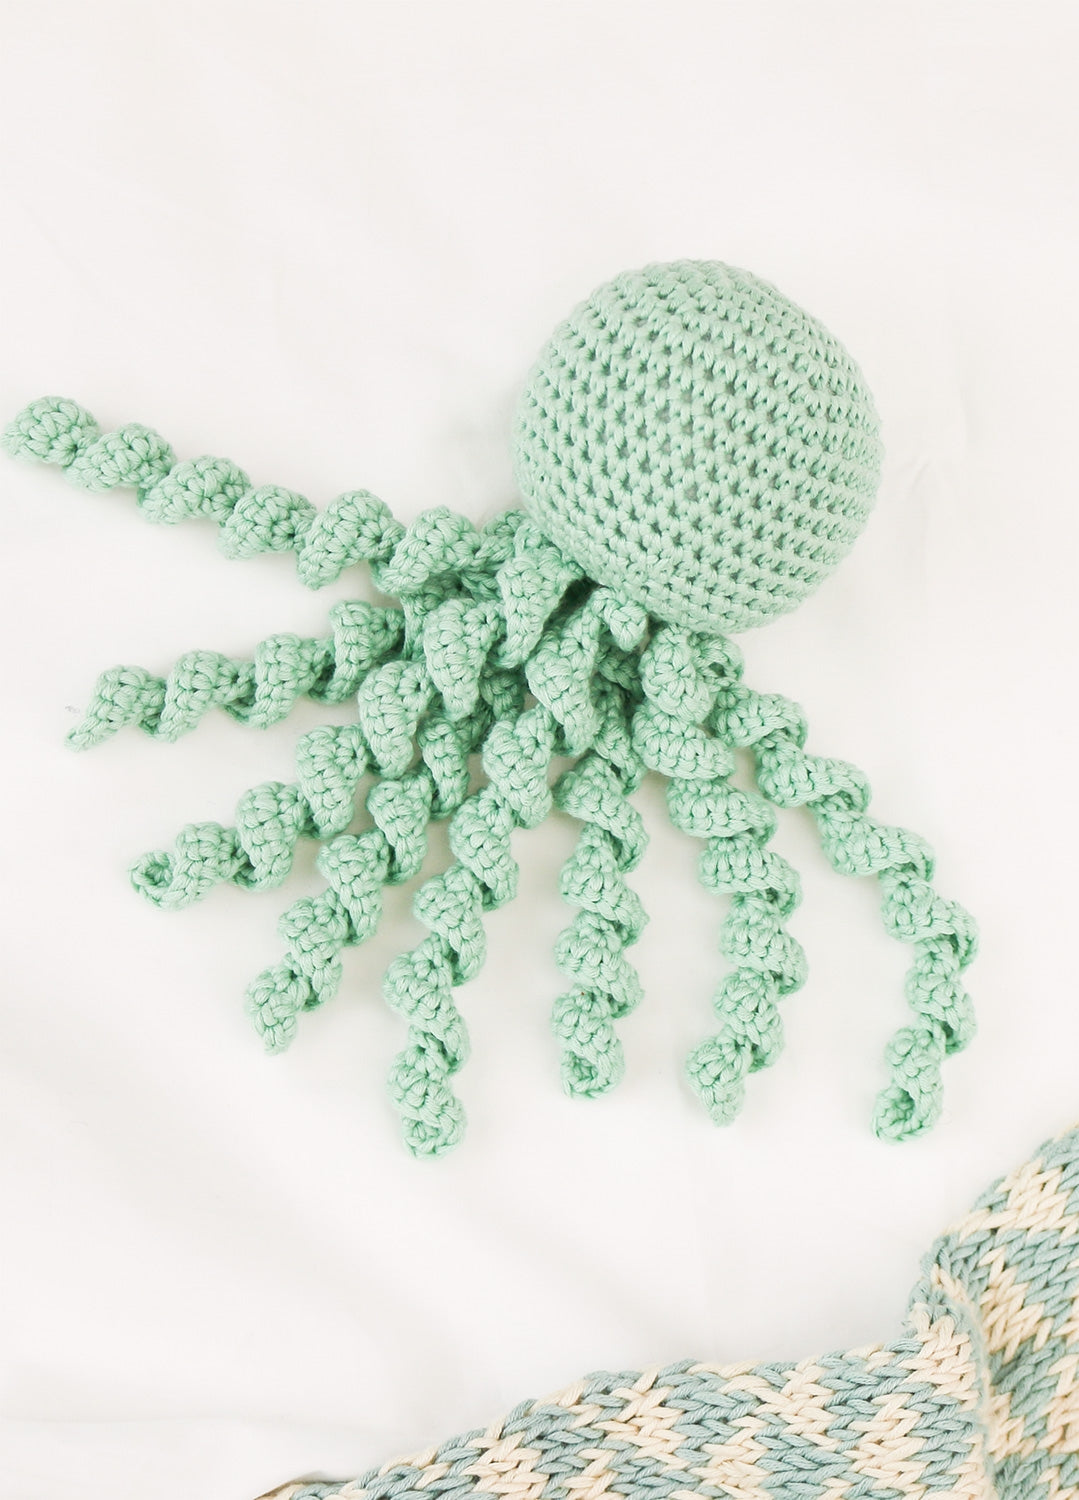 The Solidarity Octopus Free Pattern